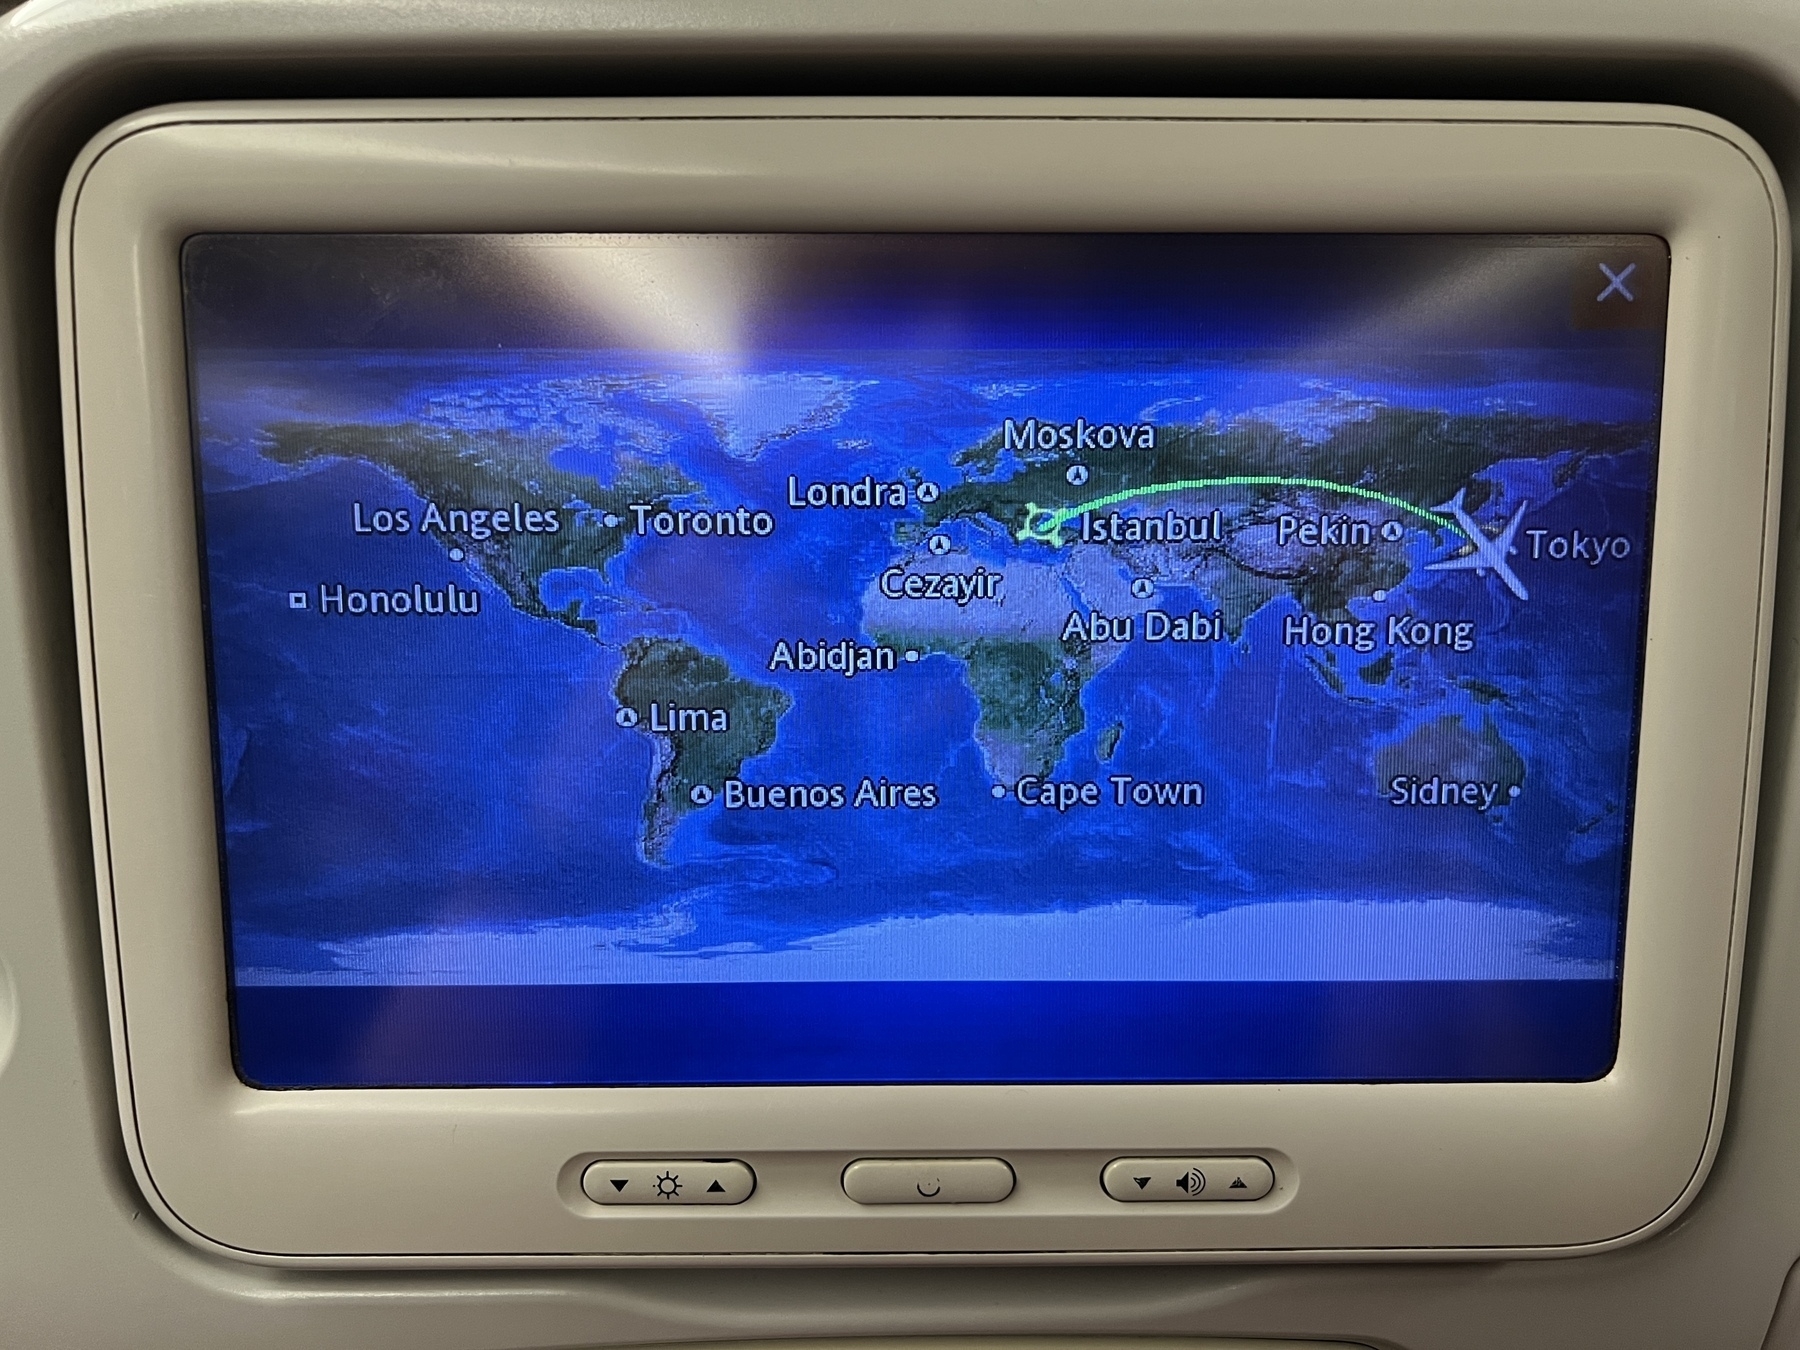 Photo of a back-of-seat monitor displaying a map of the world with a plane icon in Tokyo and destination icon in Istanbul, and a flight path arcing north with Novosibirsk at the top